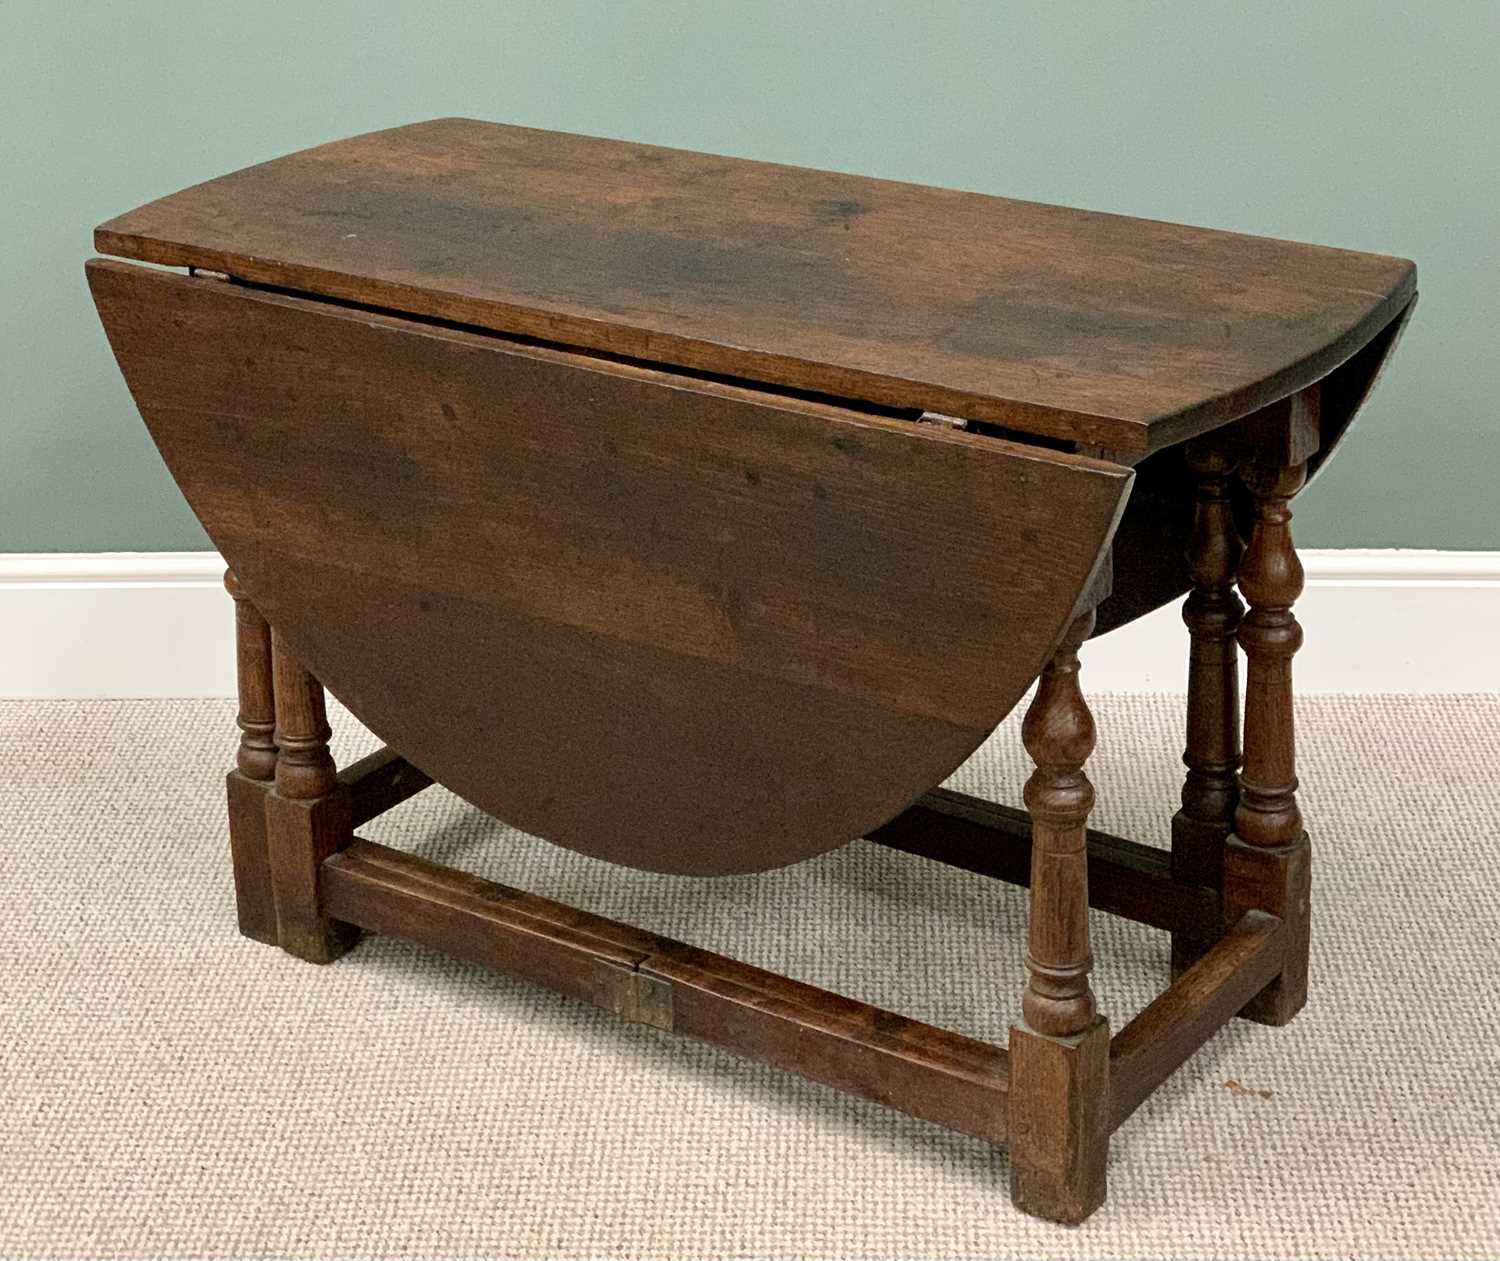 ANTIQUE OAK GATE LEG TABLE - on turned and block supports, 70cms H, 56cms W (closed), 140cms W (